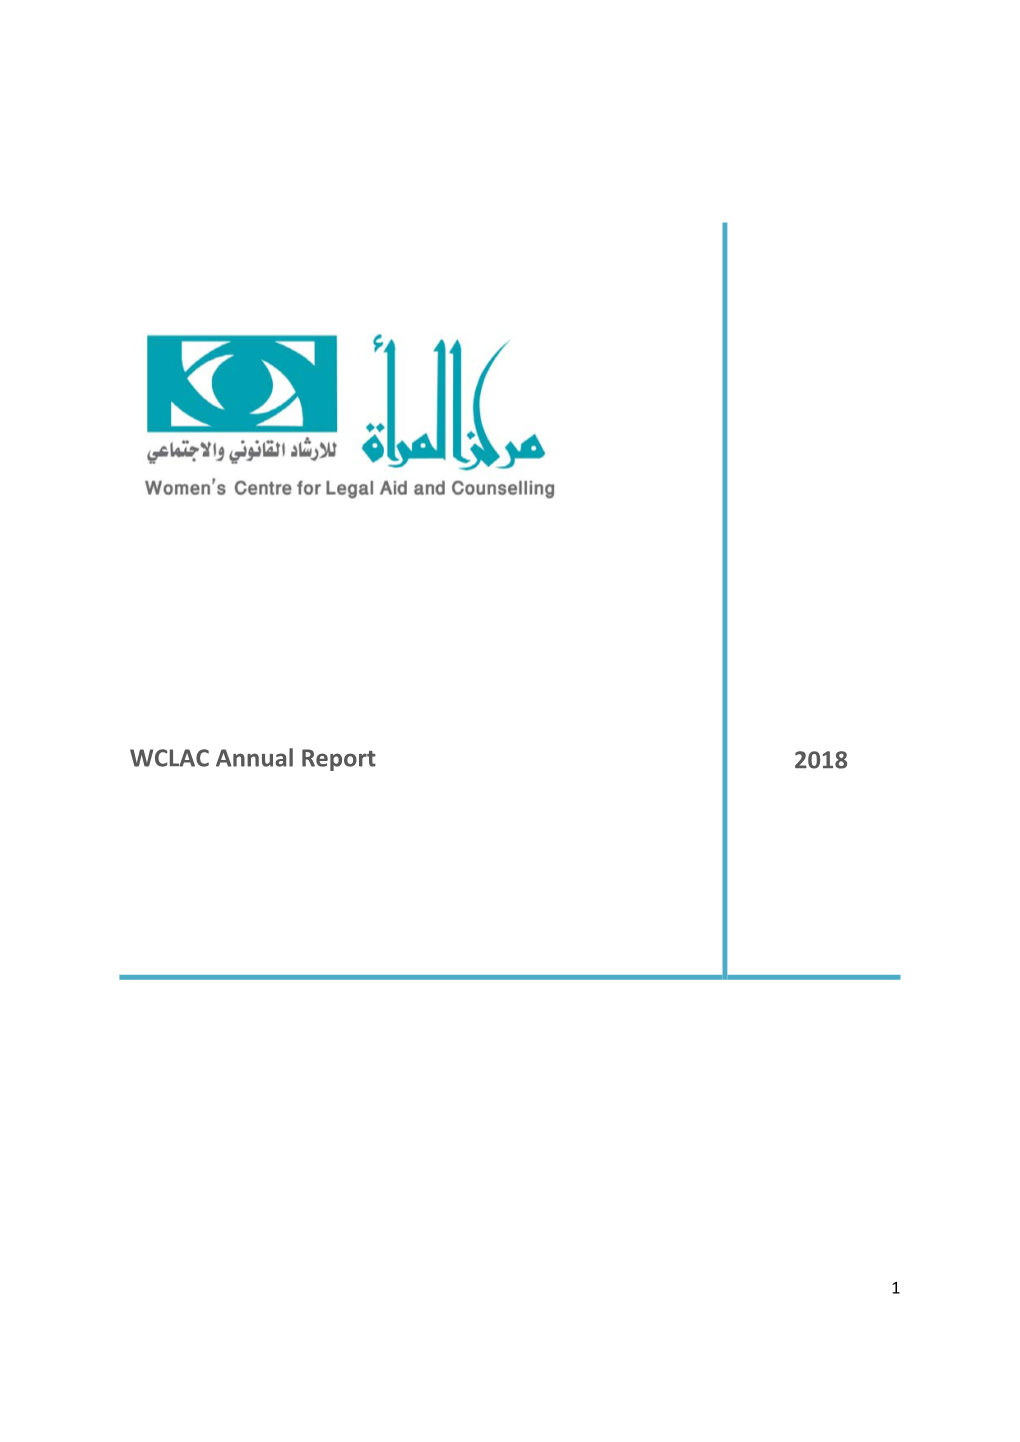 WCLAC Annual Report 2018